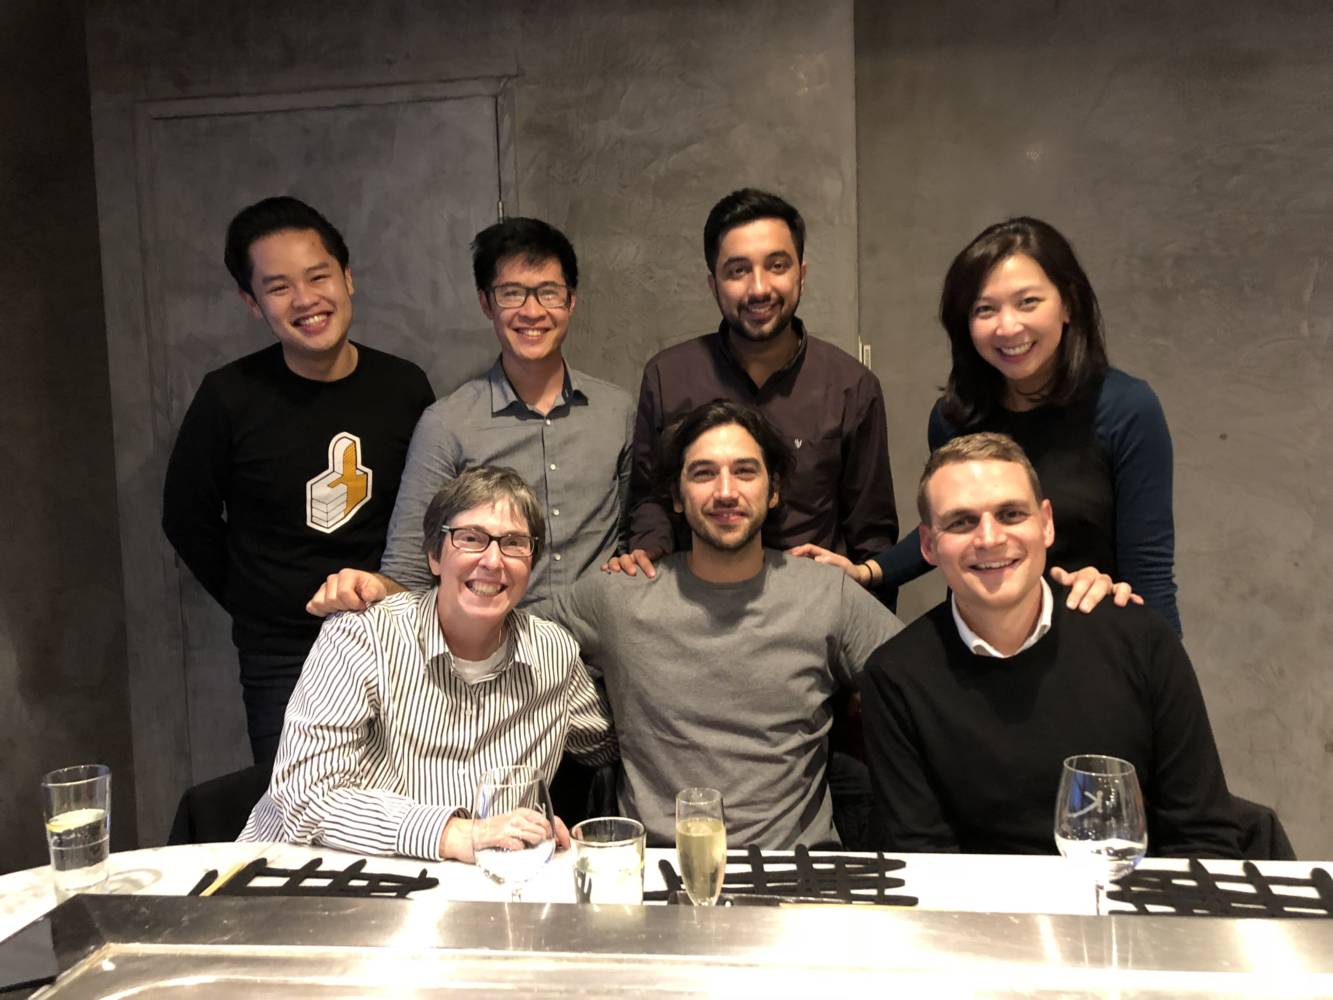 The Navi Leadership Team Top row (from left to right) Thai Nguyen Le (Product Development Analyst) and Co-founders: Shing Yue Sheung , Mubin Yousuf , Wei Sue. Bottom row (from left to right) Dr. Christiane Theda, Brad Bergmann, and Alex Newton